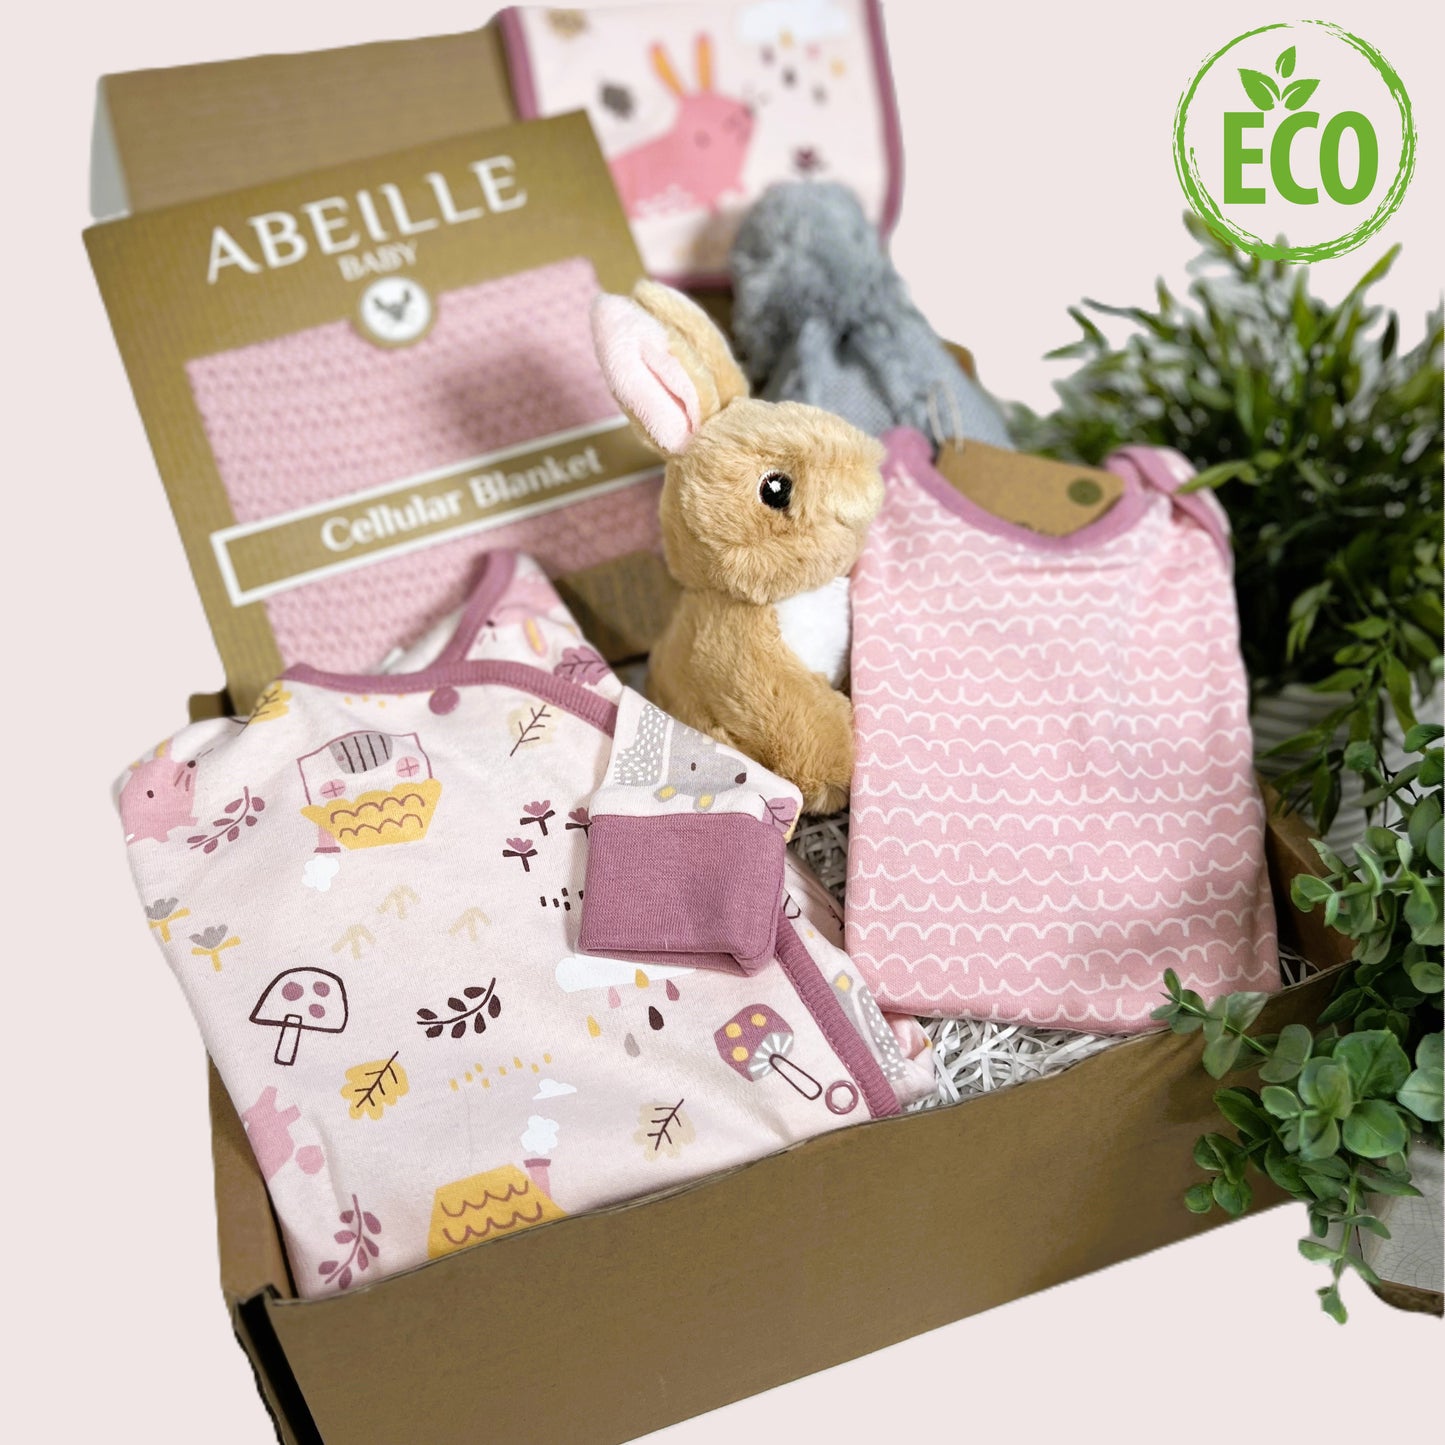 Pink new baby girl gift, eco friendly contents including organic cotton 3 piece baby clothing set with fold over cuffs and feet, a pink cotton cellular baby blanket, a grey baby pompom hat and a cute Eco-Nation bunny soft baby toy